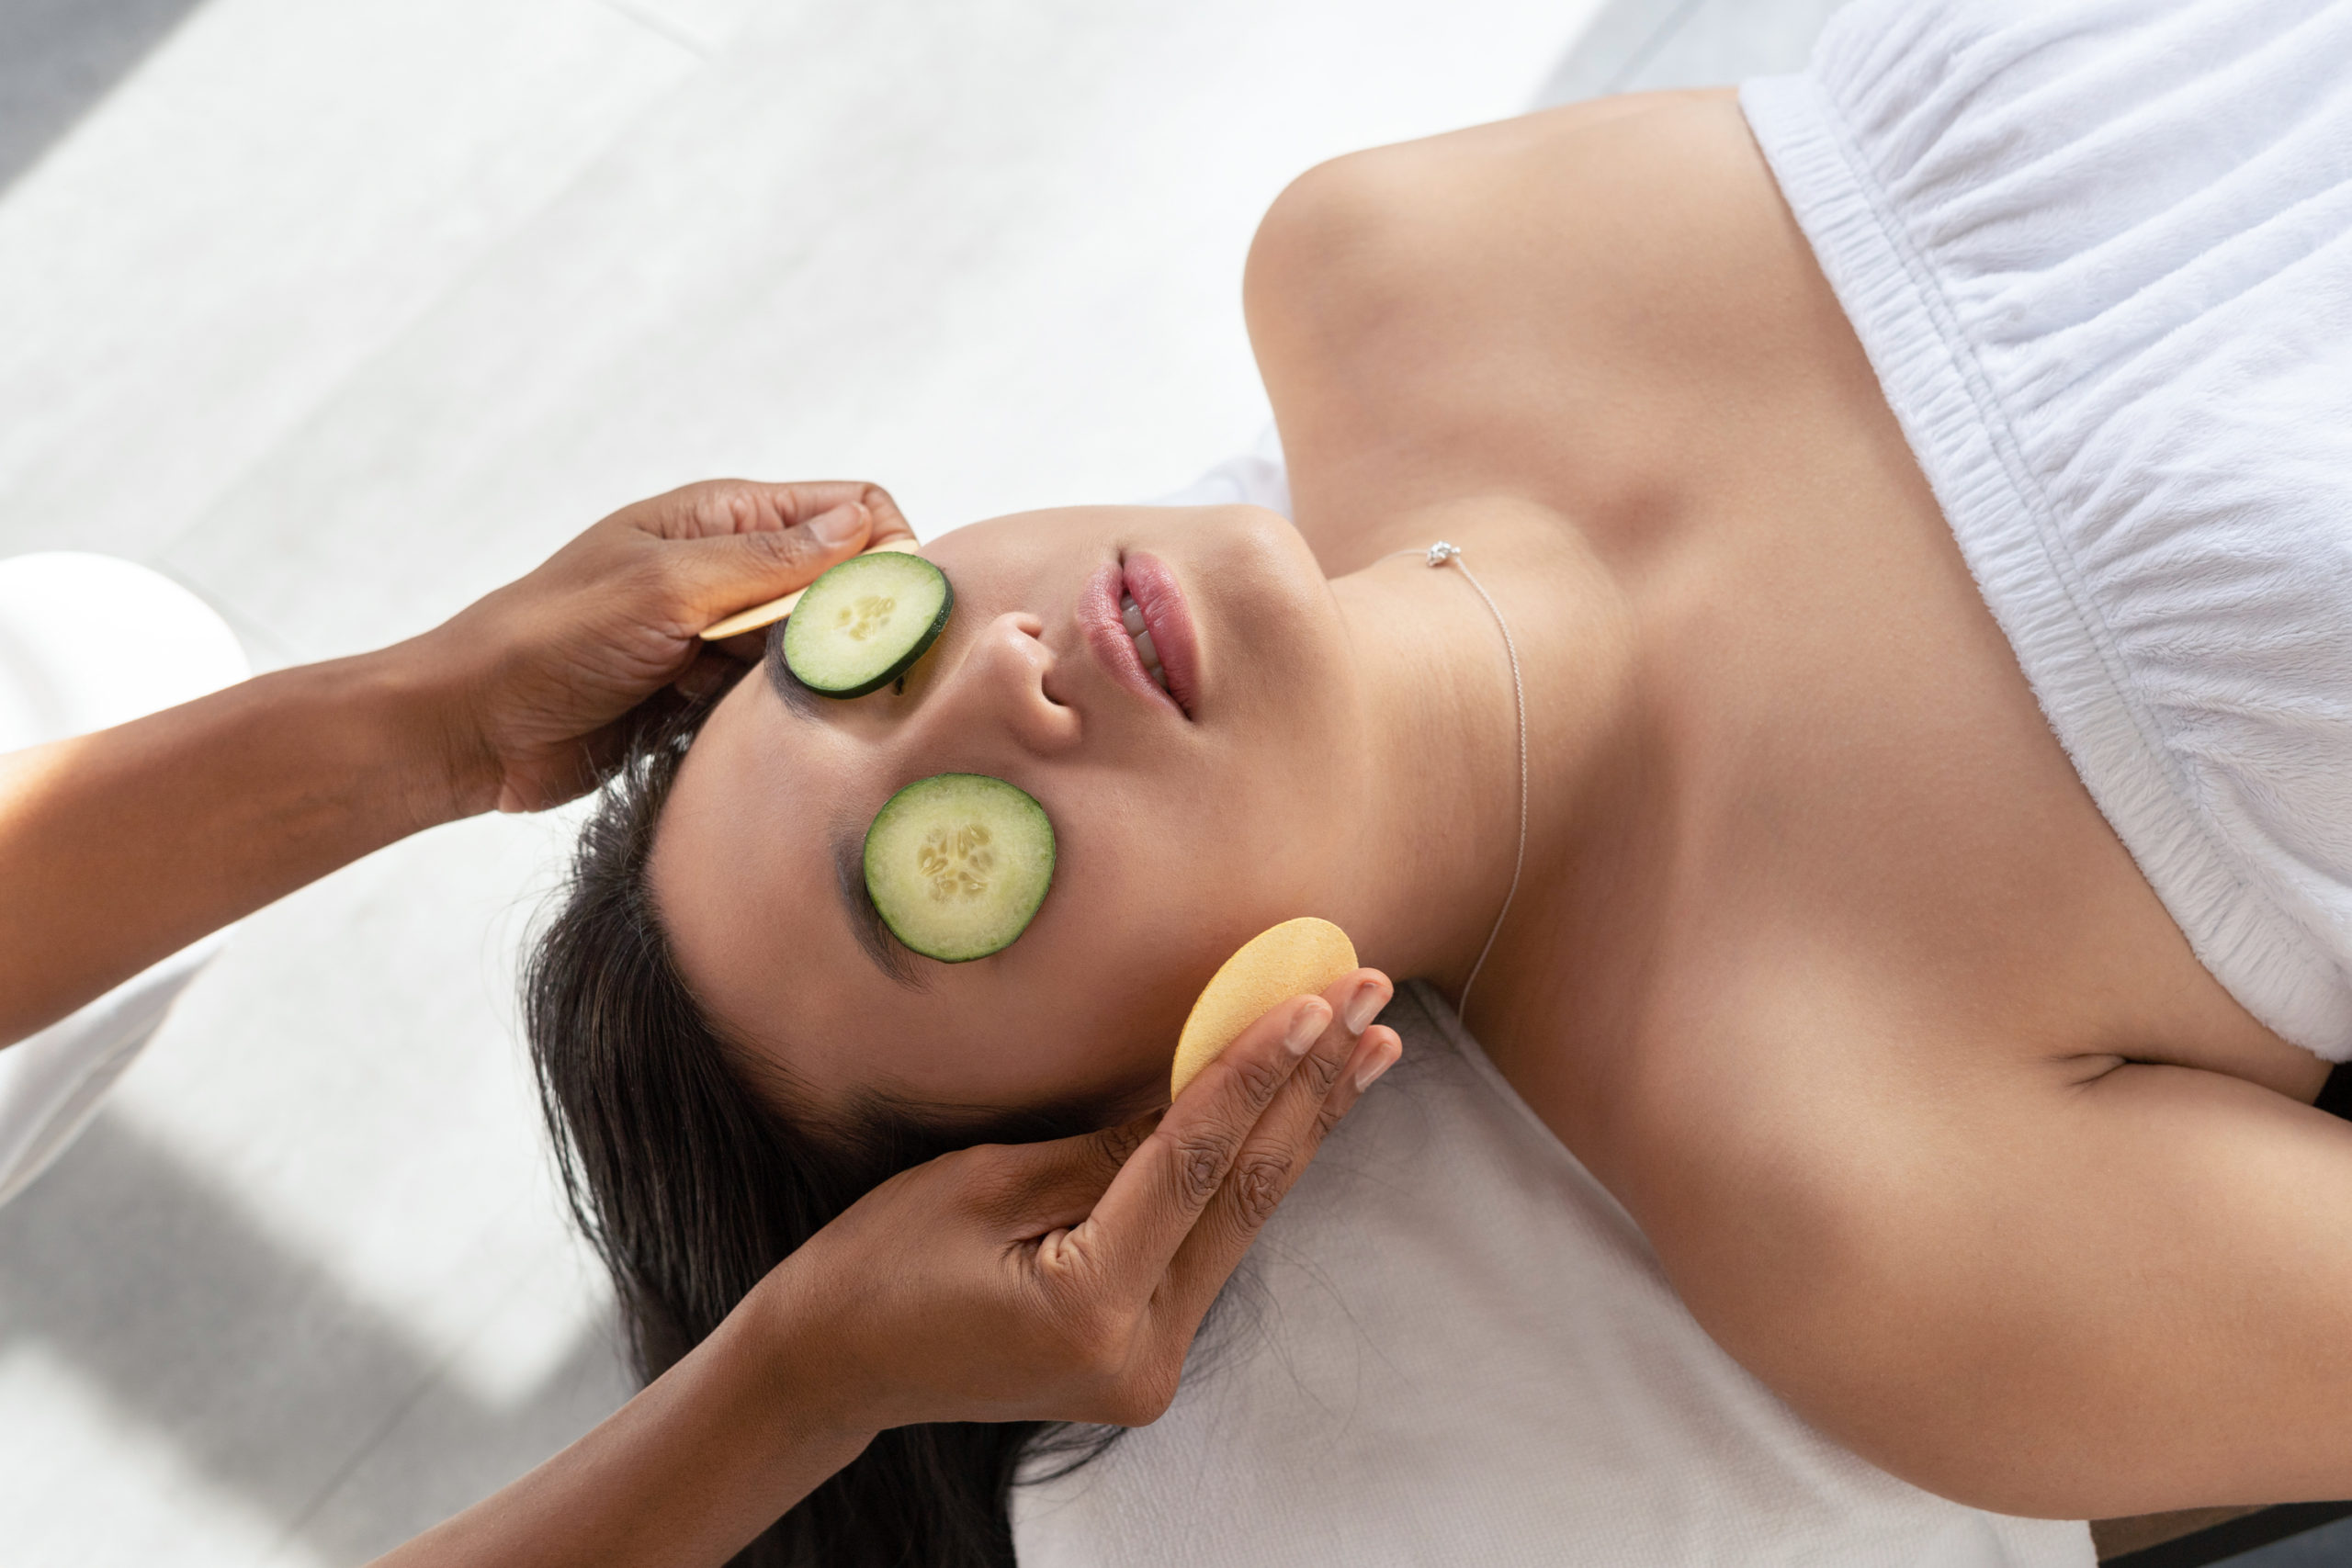 an-asian-lady-lying-on-her-back-wearing-a-white-towel-with-cucumber-slices-on-her-eyes-receiving-a-facial-massage